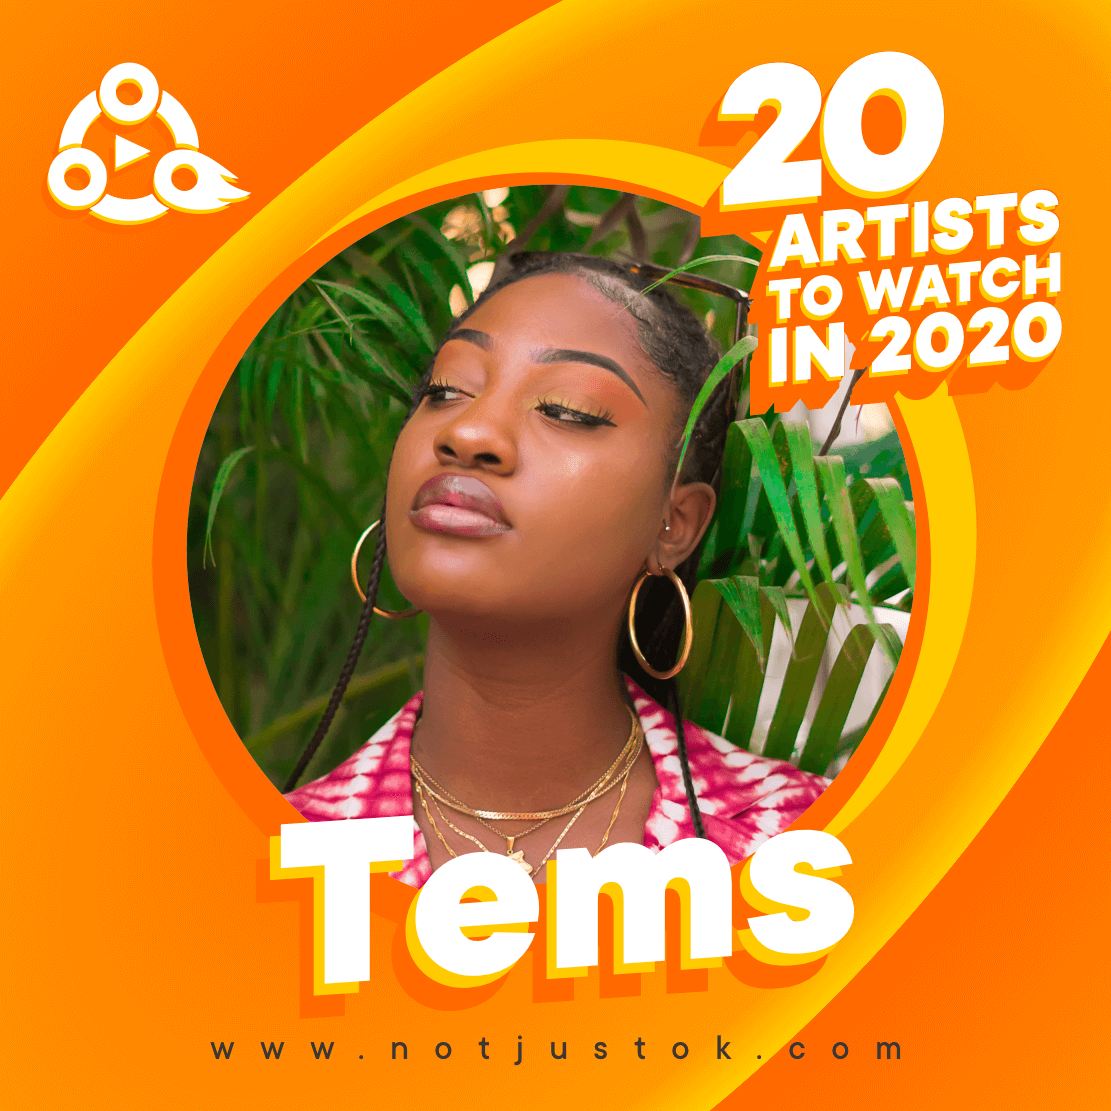 The 20 Artists To Watch In 2020 - Tems